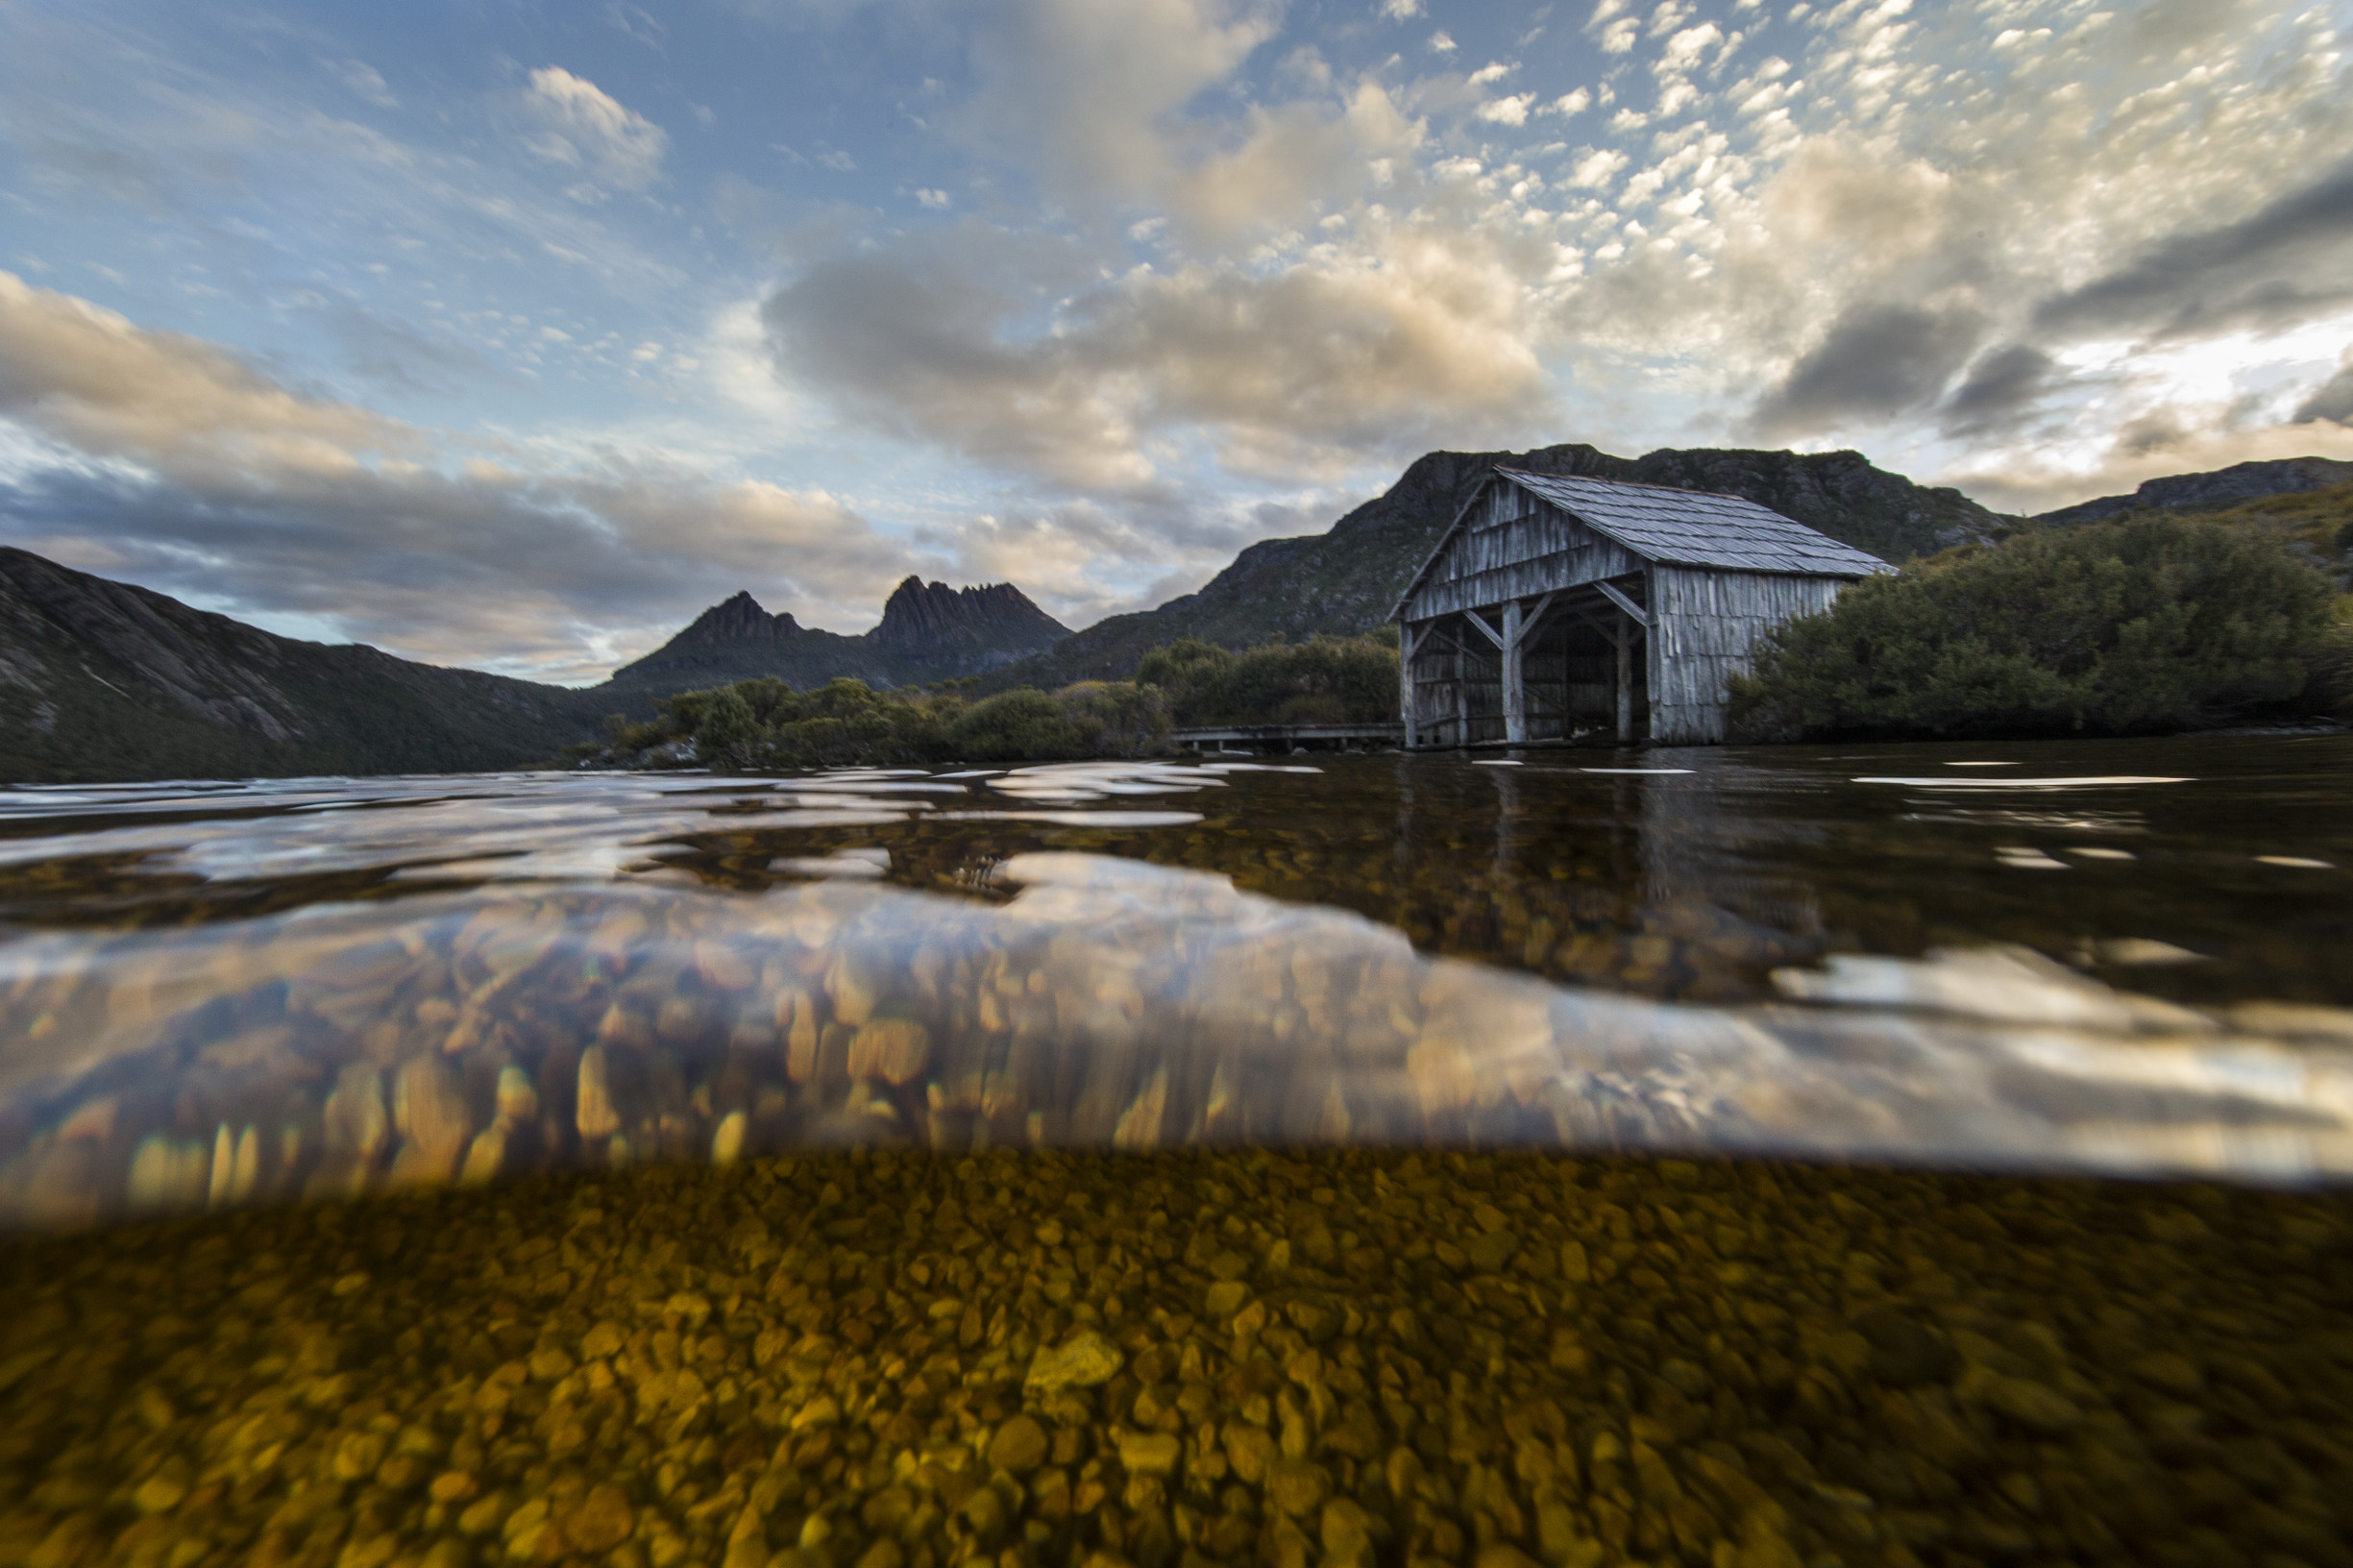 Cradle Mountain offers world-class hikes, unique wildlife experiences and a life-changing connection to nature.